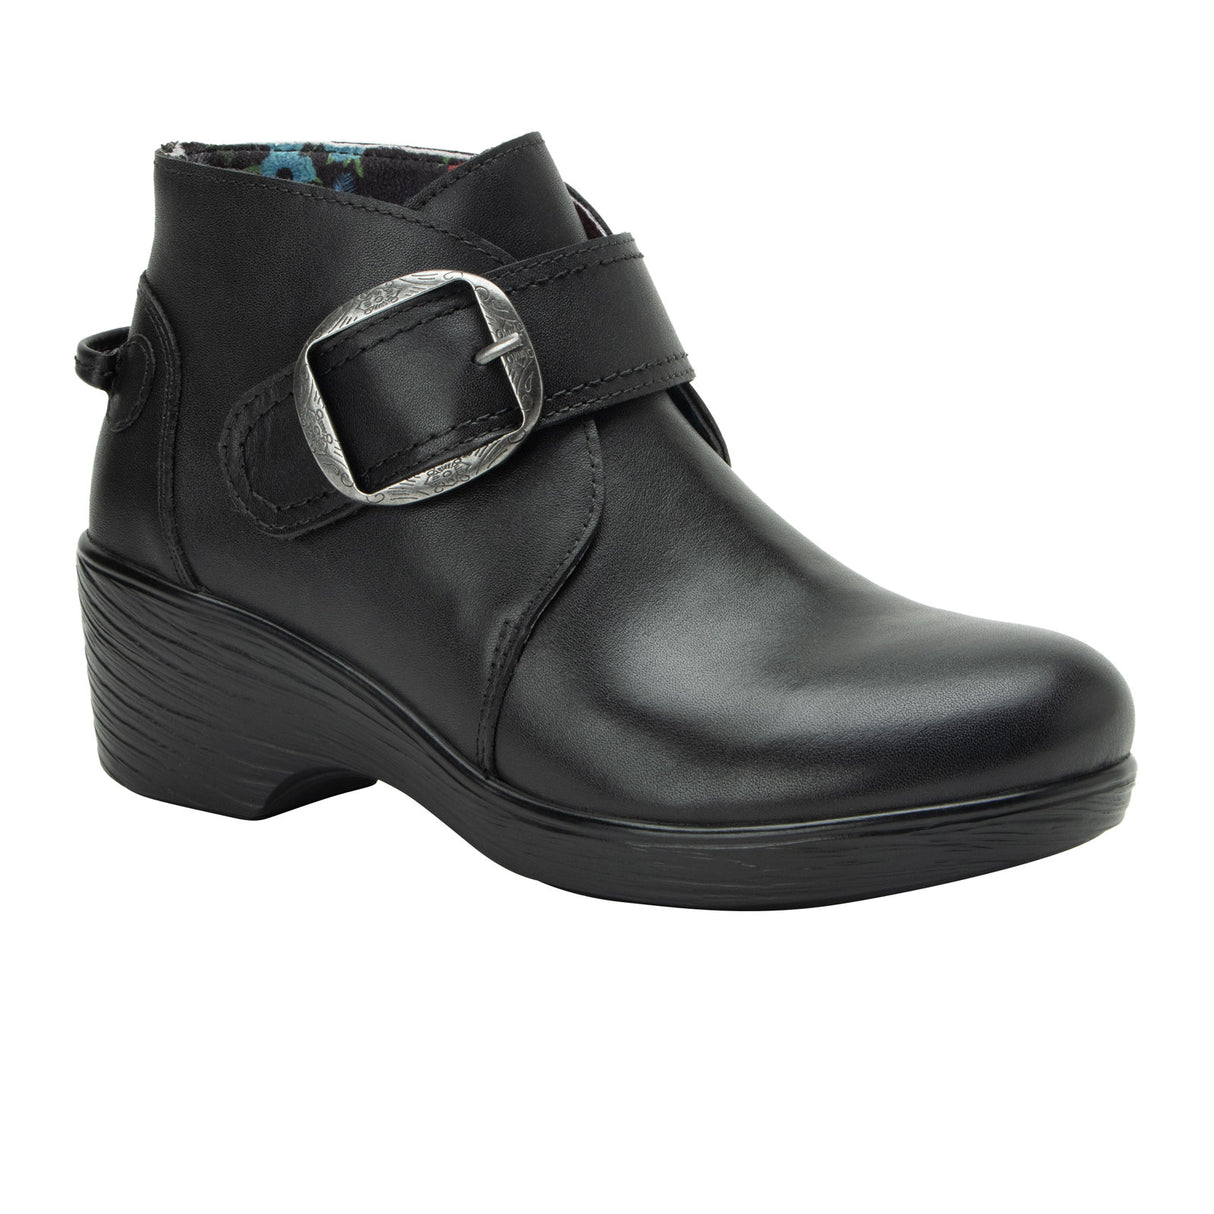 Alegria Symone Ankle Boot (Women) - Coal Boots - Fashion - Ankle Boot - The Heel Shoe Fitters